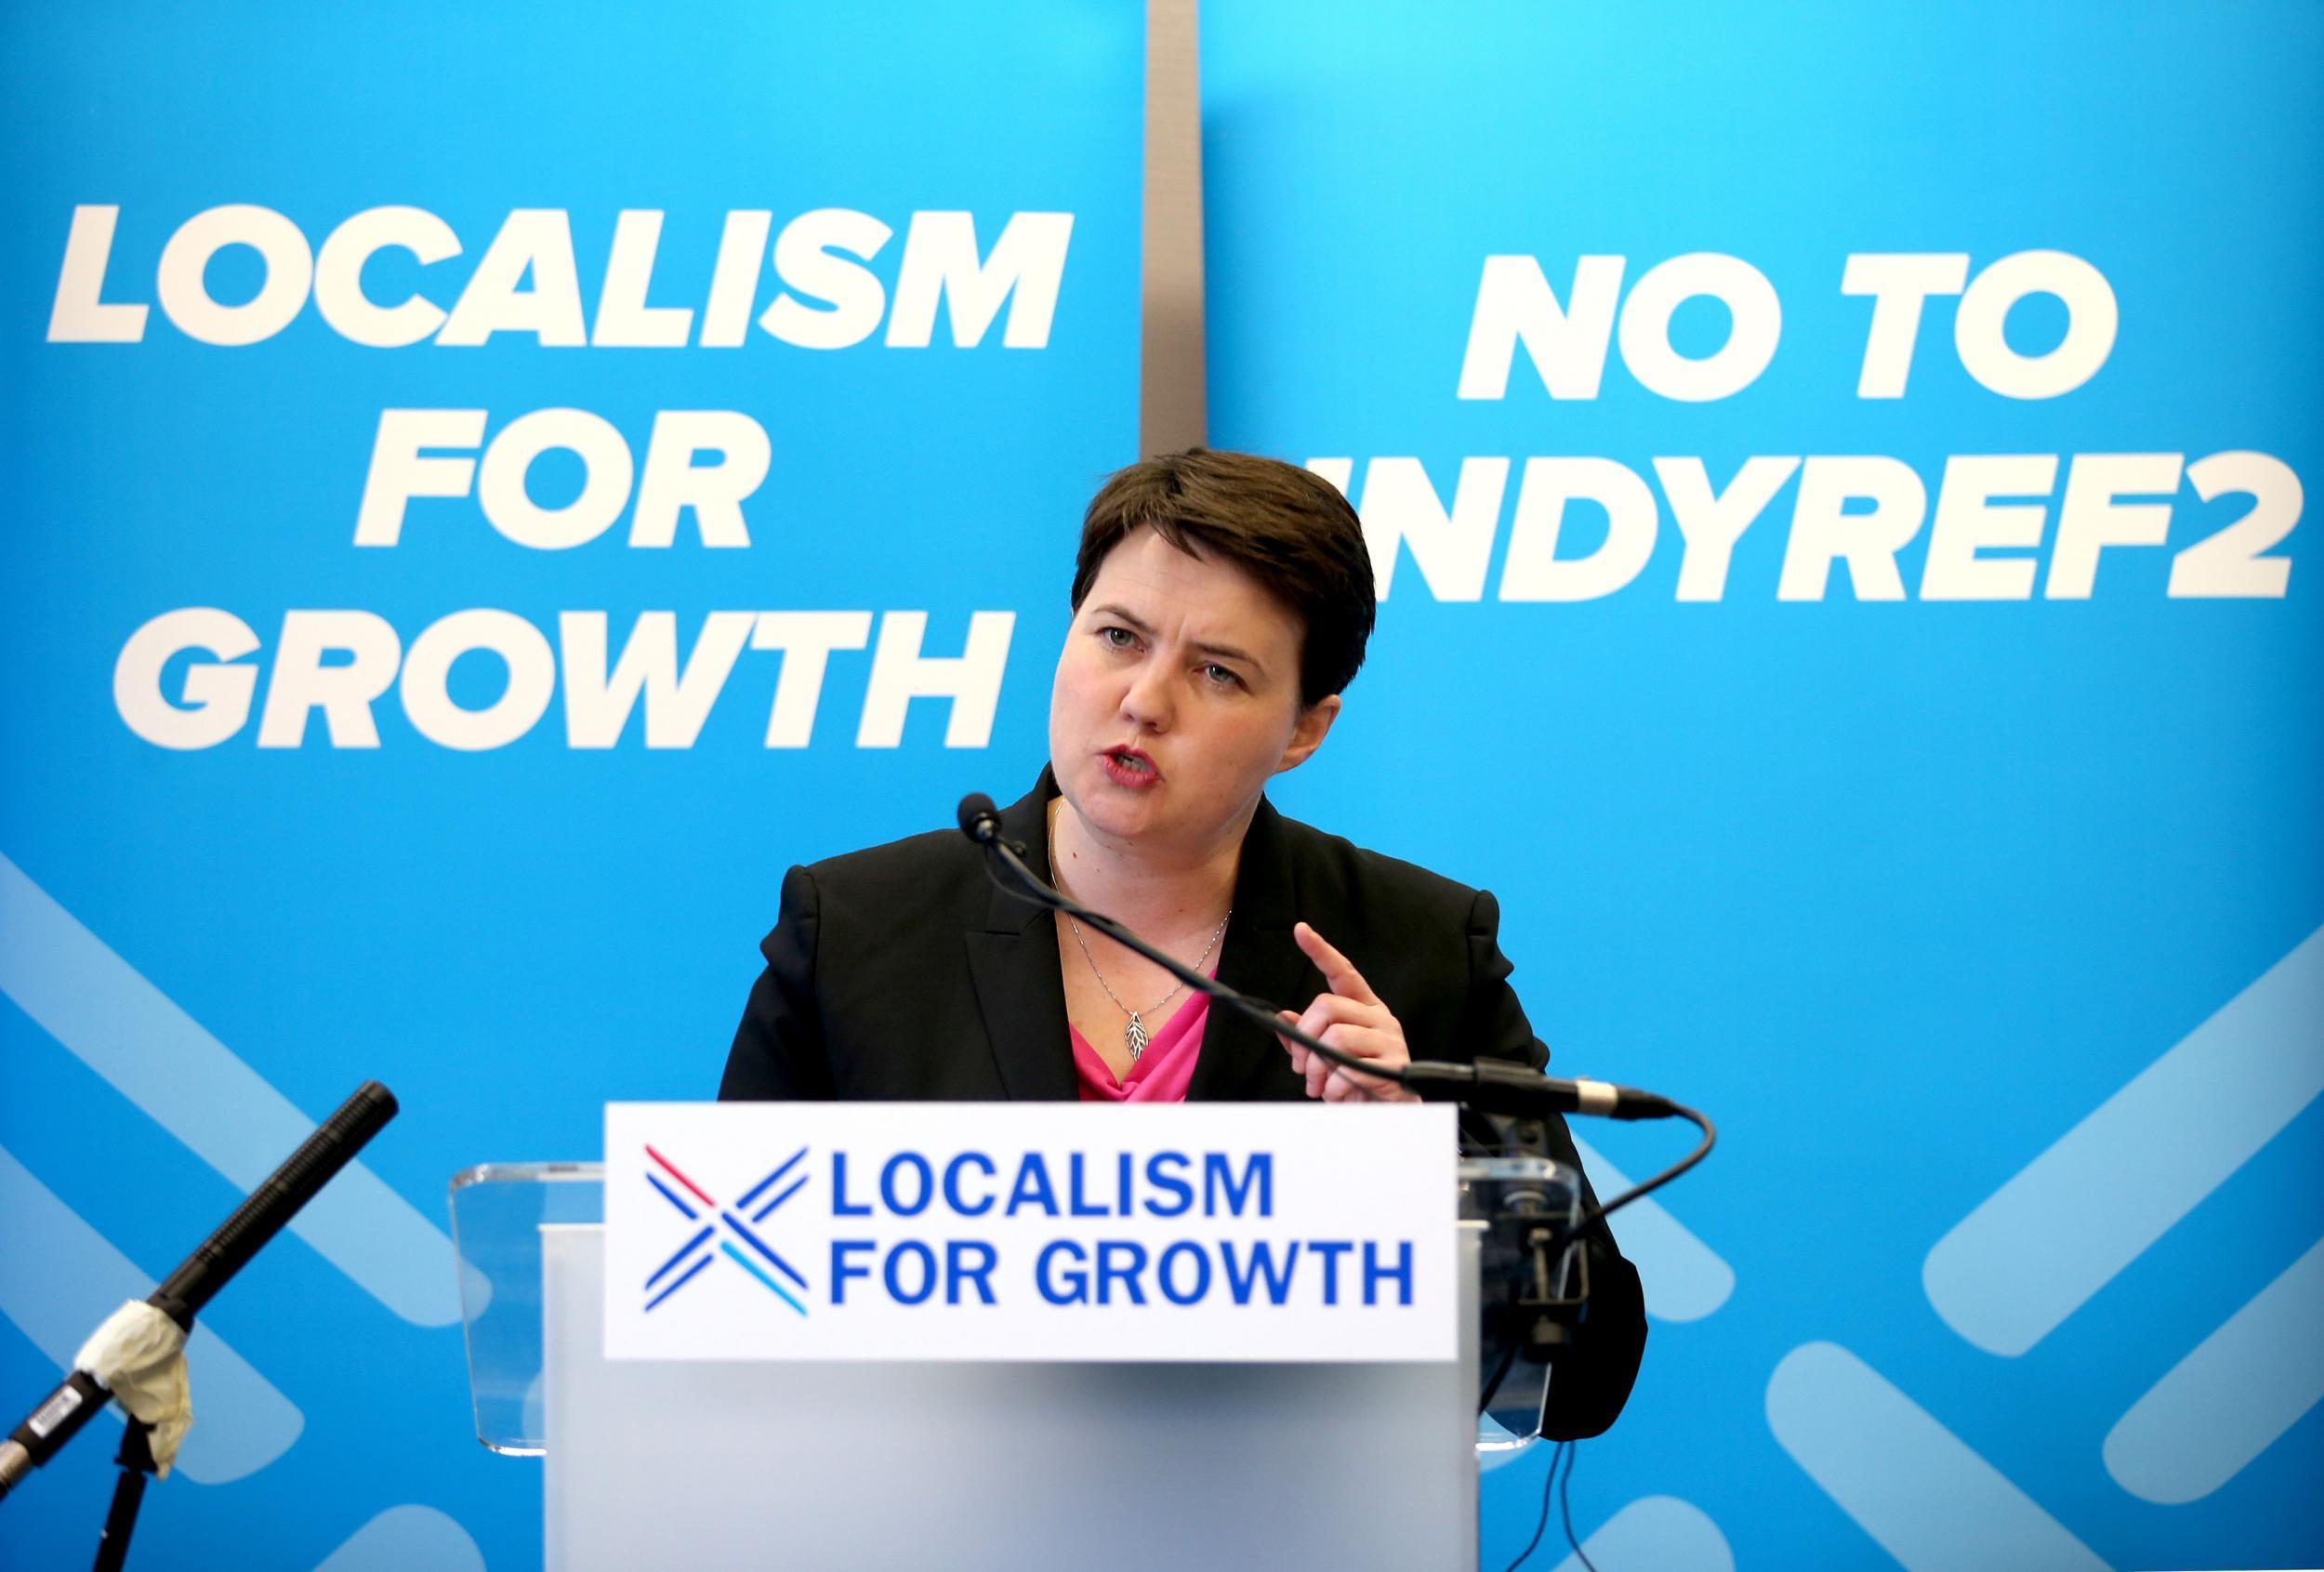 Davidson’s laser focus on the issue of the union plainly paid off